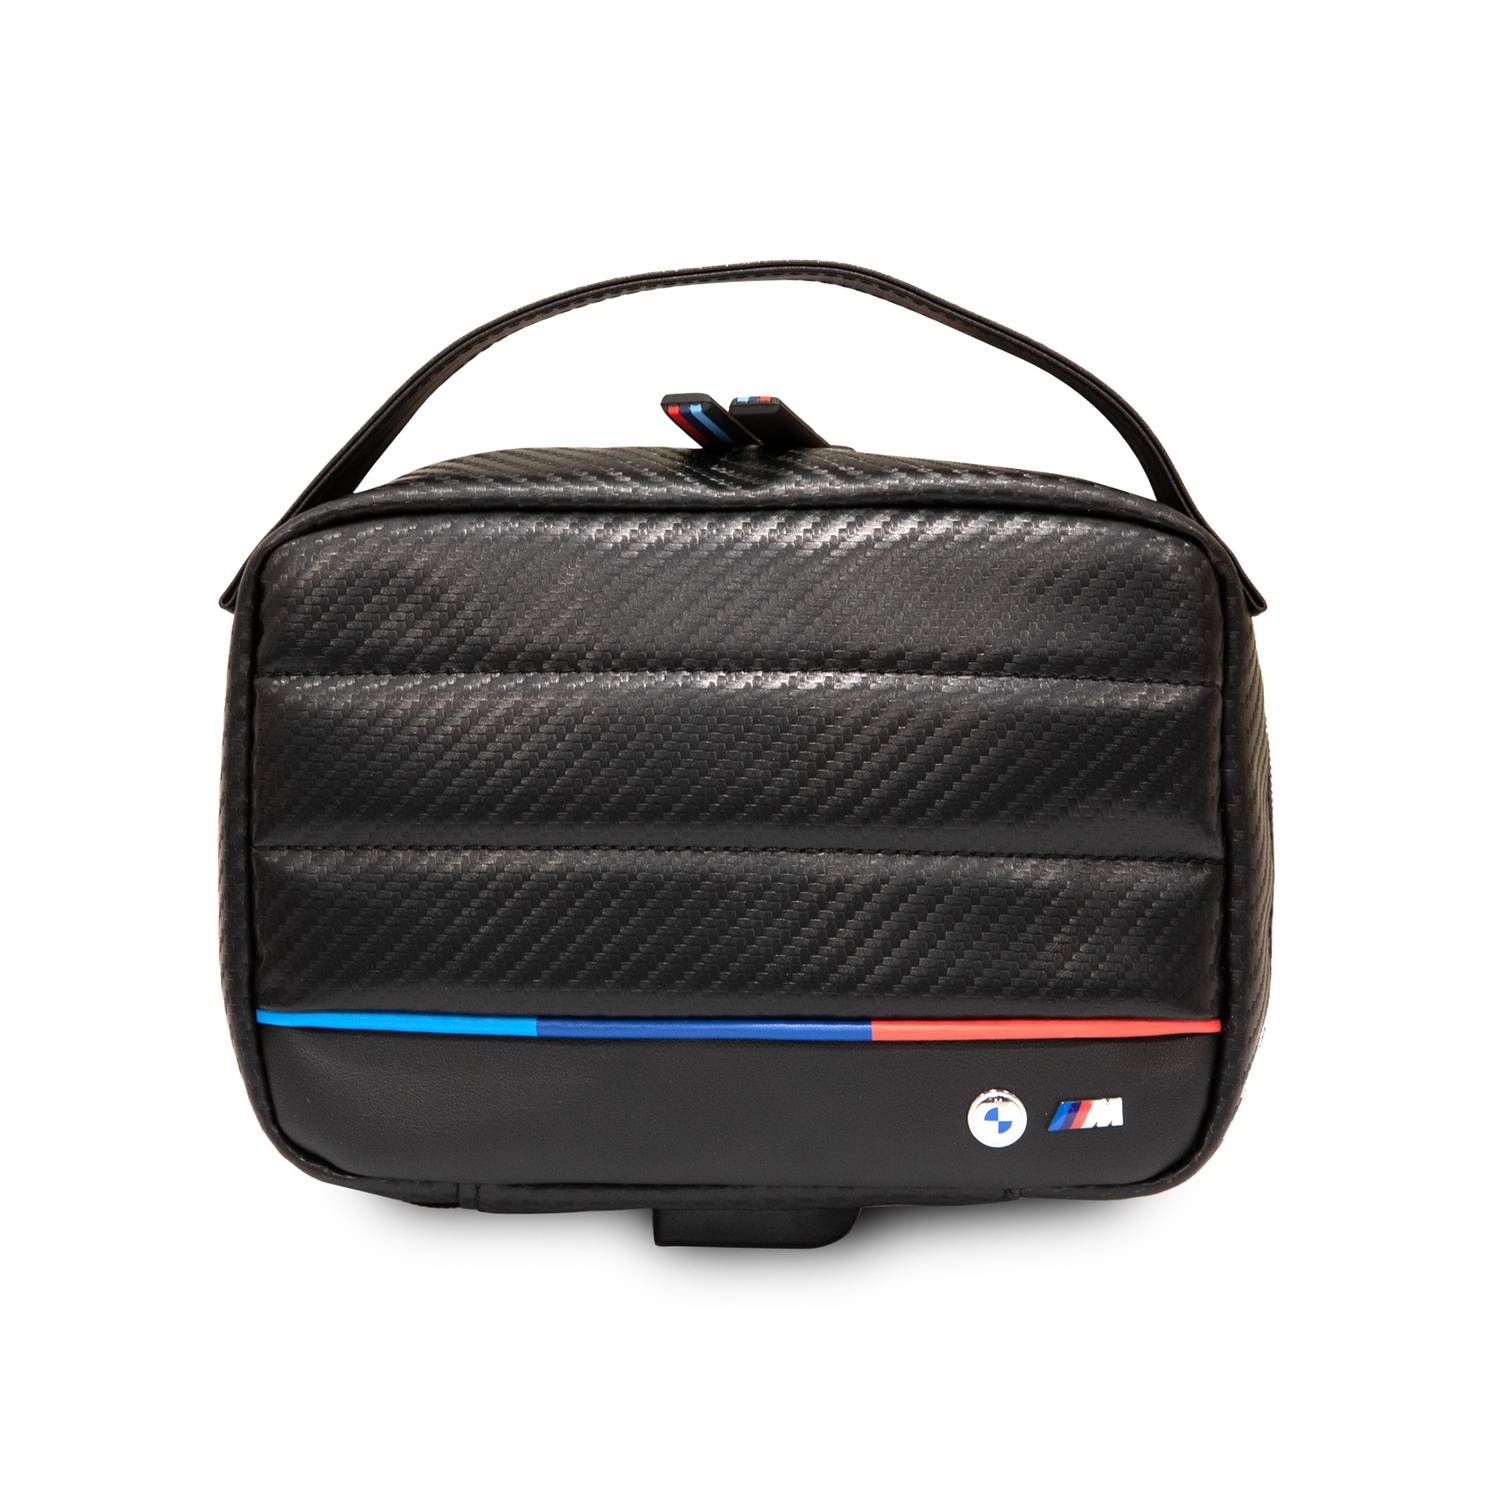 images/stories/virtuemart/product/CG_MOBILE_BMW_Carbon_PU_Hand_Bag_With_Contrasted_Tricolor_Line_Protective_Bag_Universal_1__1673866538_68